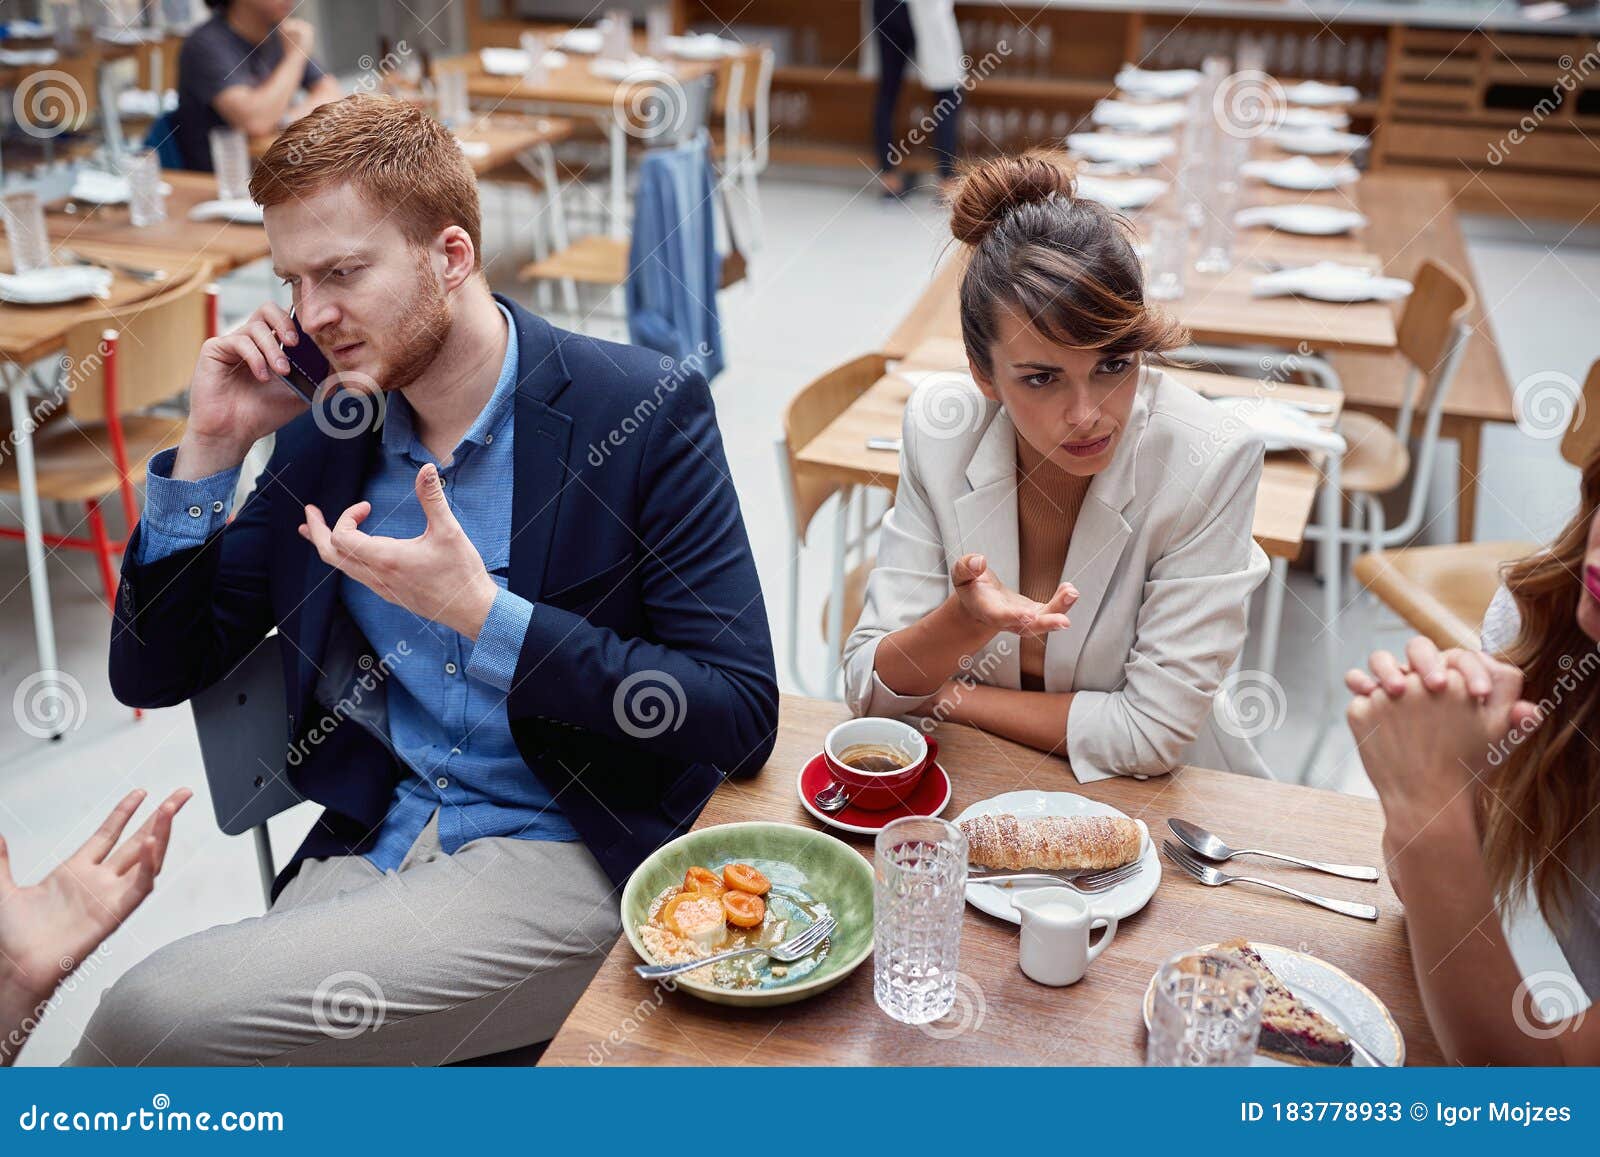 young adult businesspeople at lunch in a restaurant discussing about issues after coronavirus. recesion, economy, business